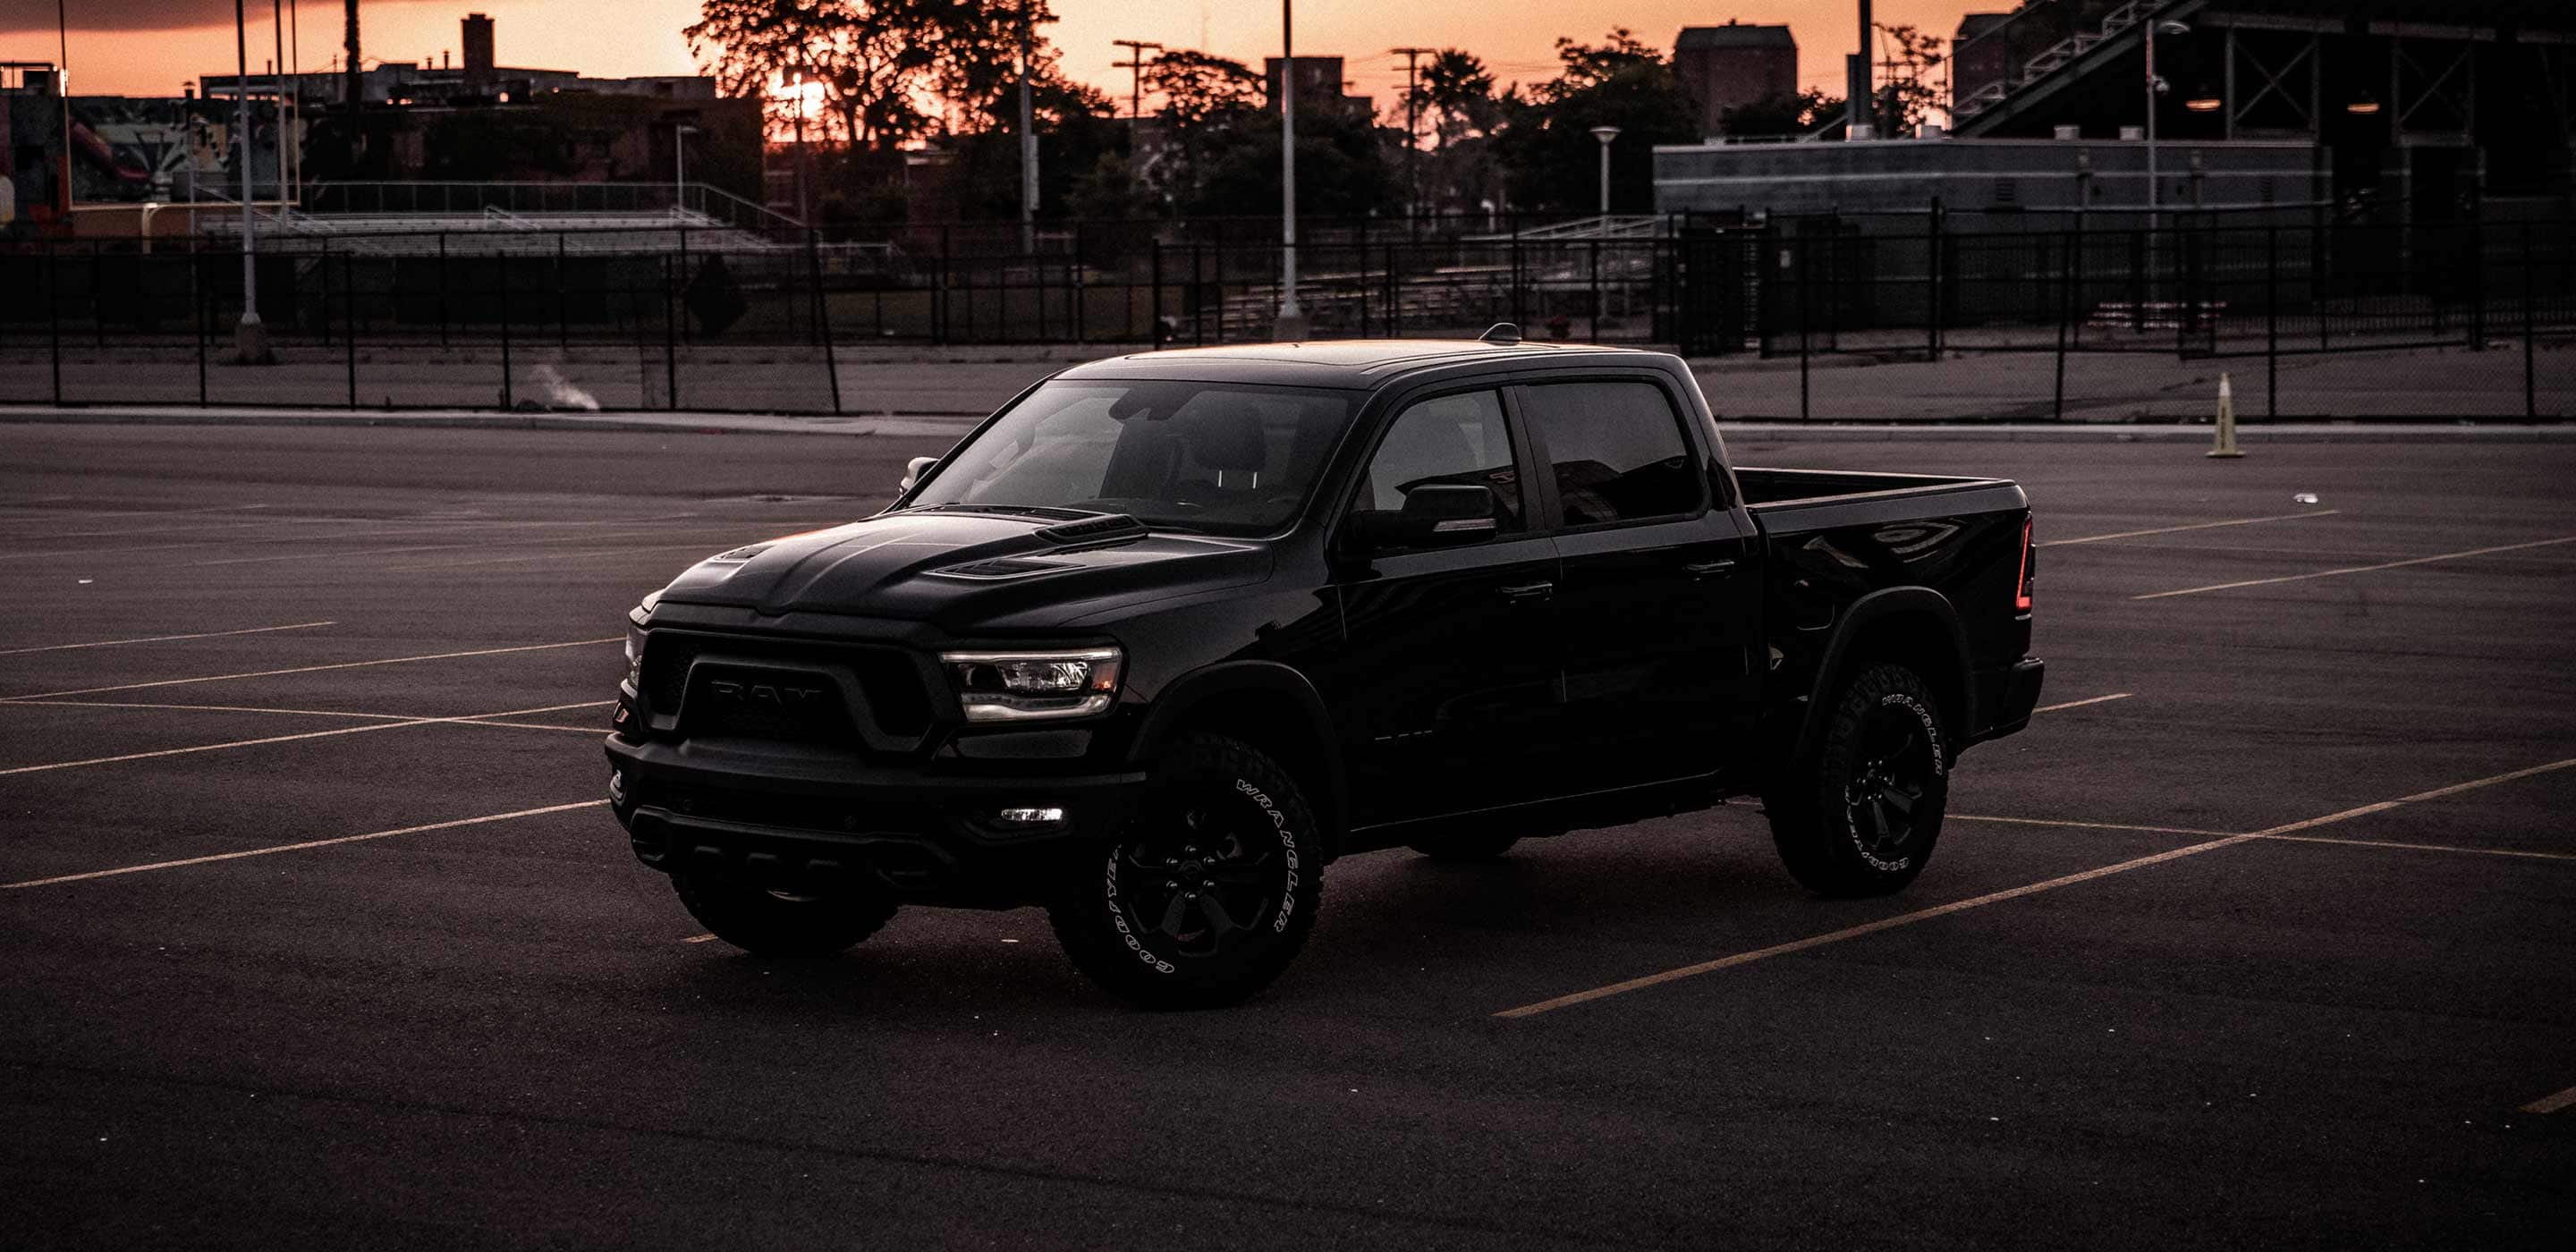 Display The 2022 Ram 1500 in a parking lot outside a sports field at dusk.